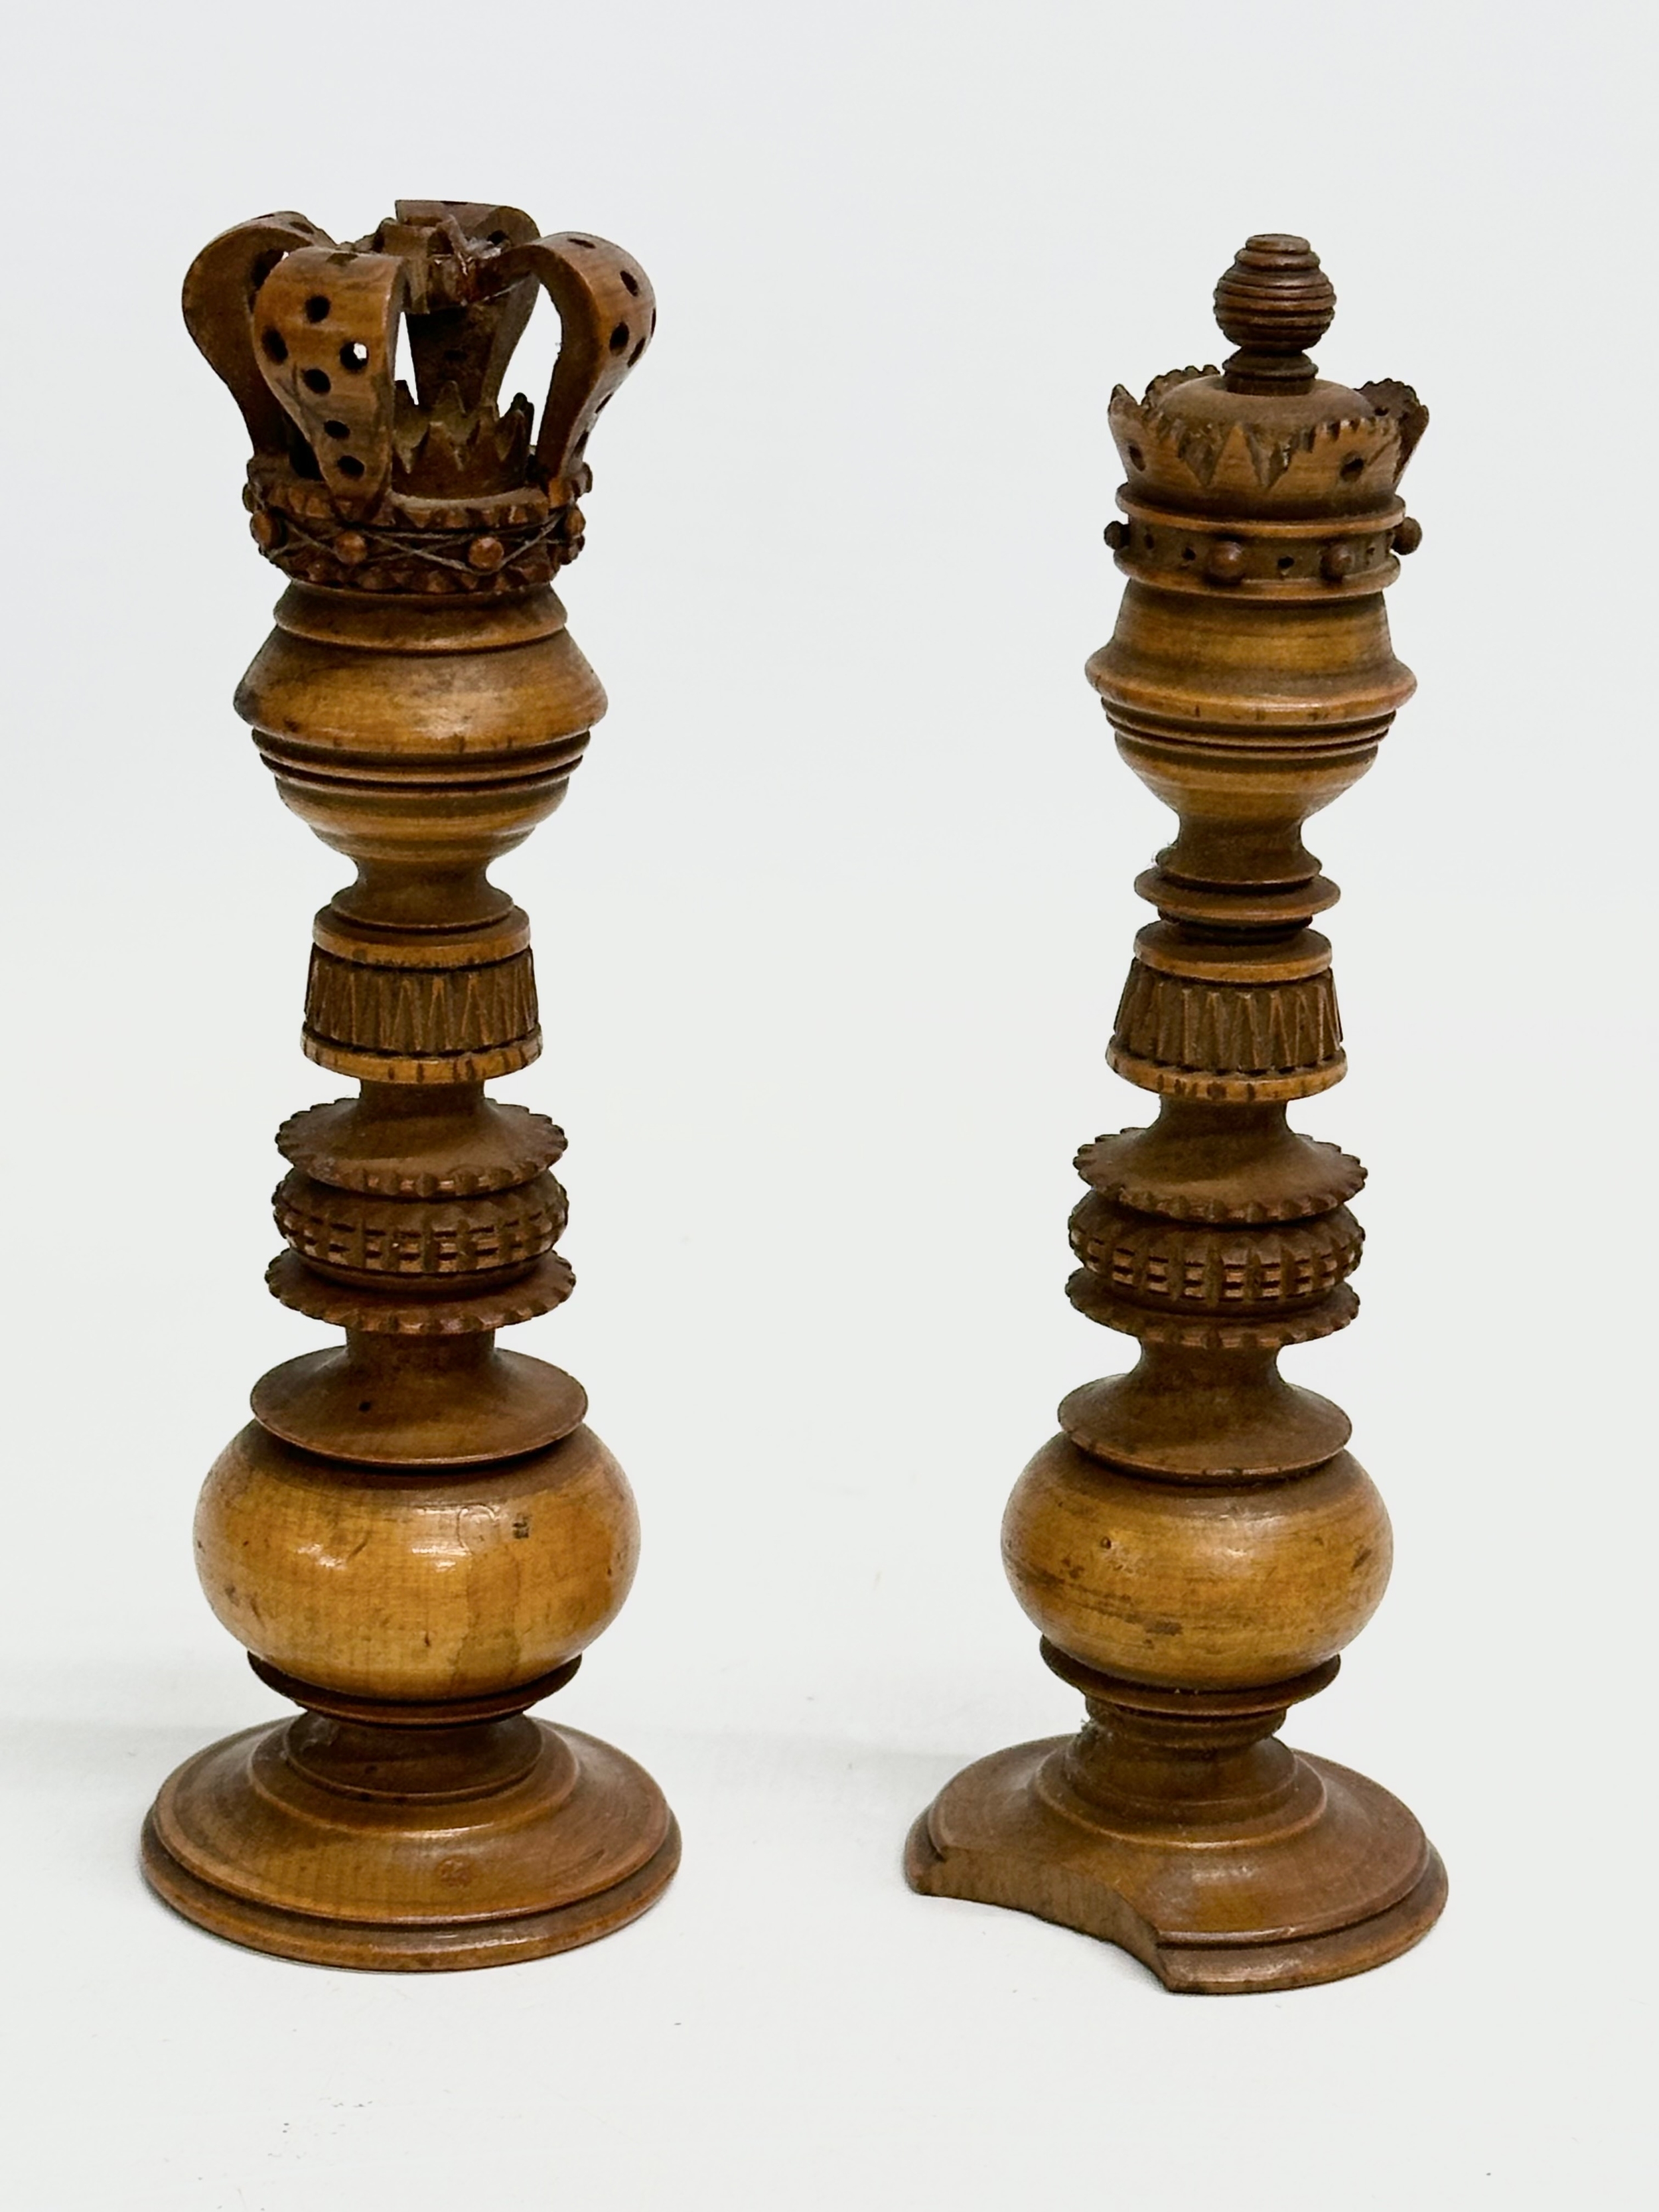 Good quality 19th Century chess pieces in the style of the Holy Land Crusade, Islamic vs Christian - Image 13 of 17